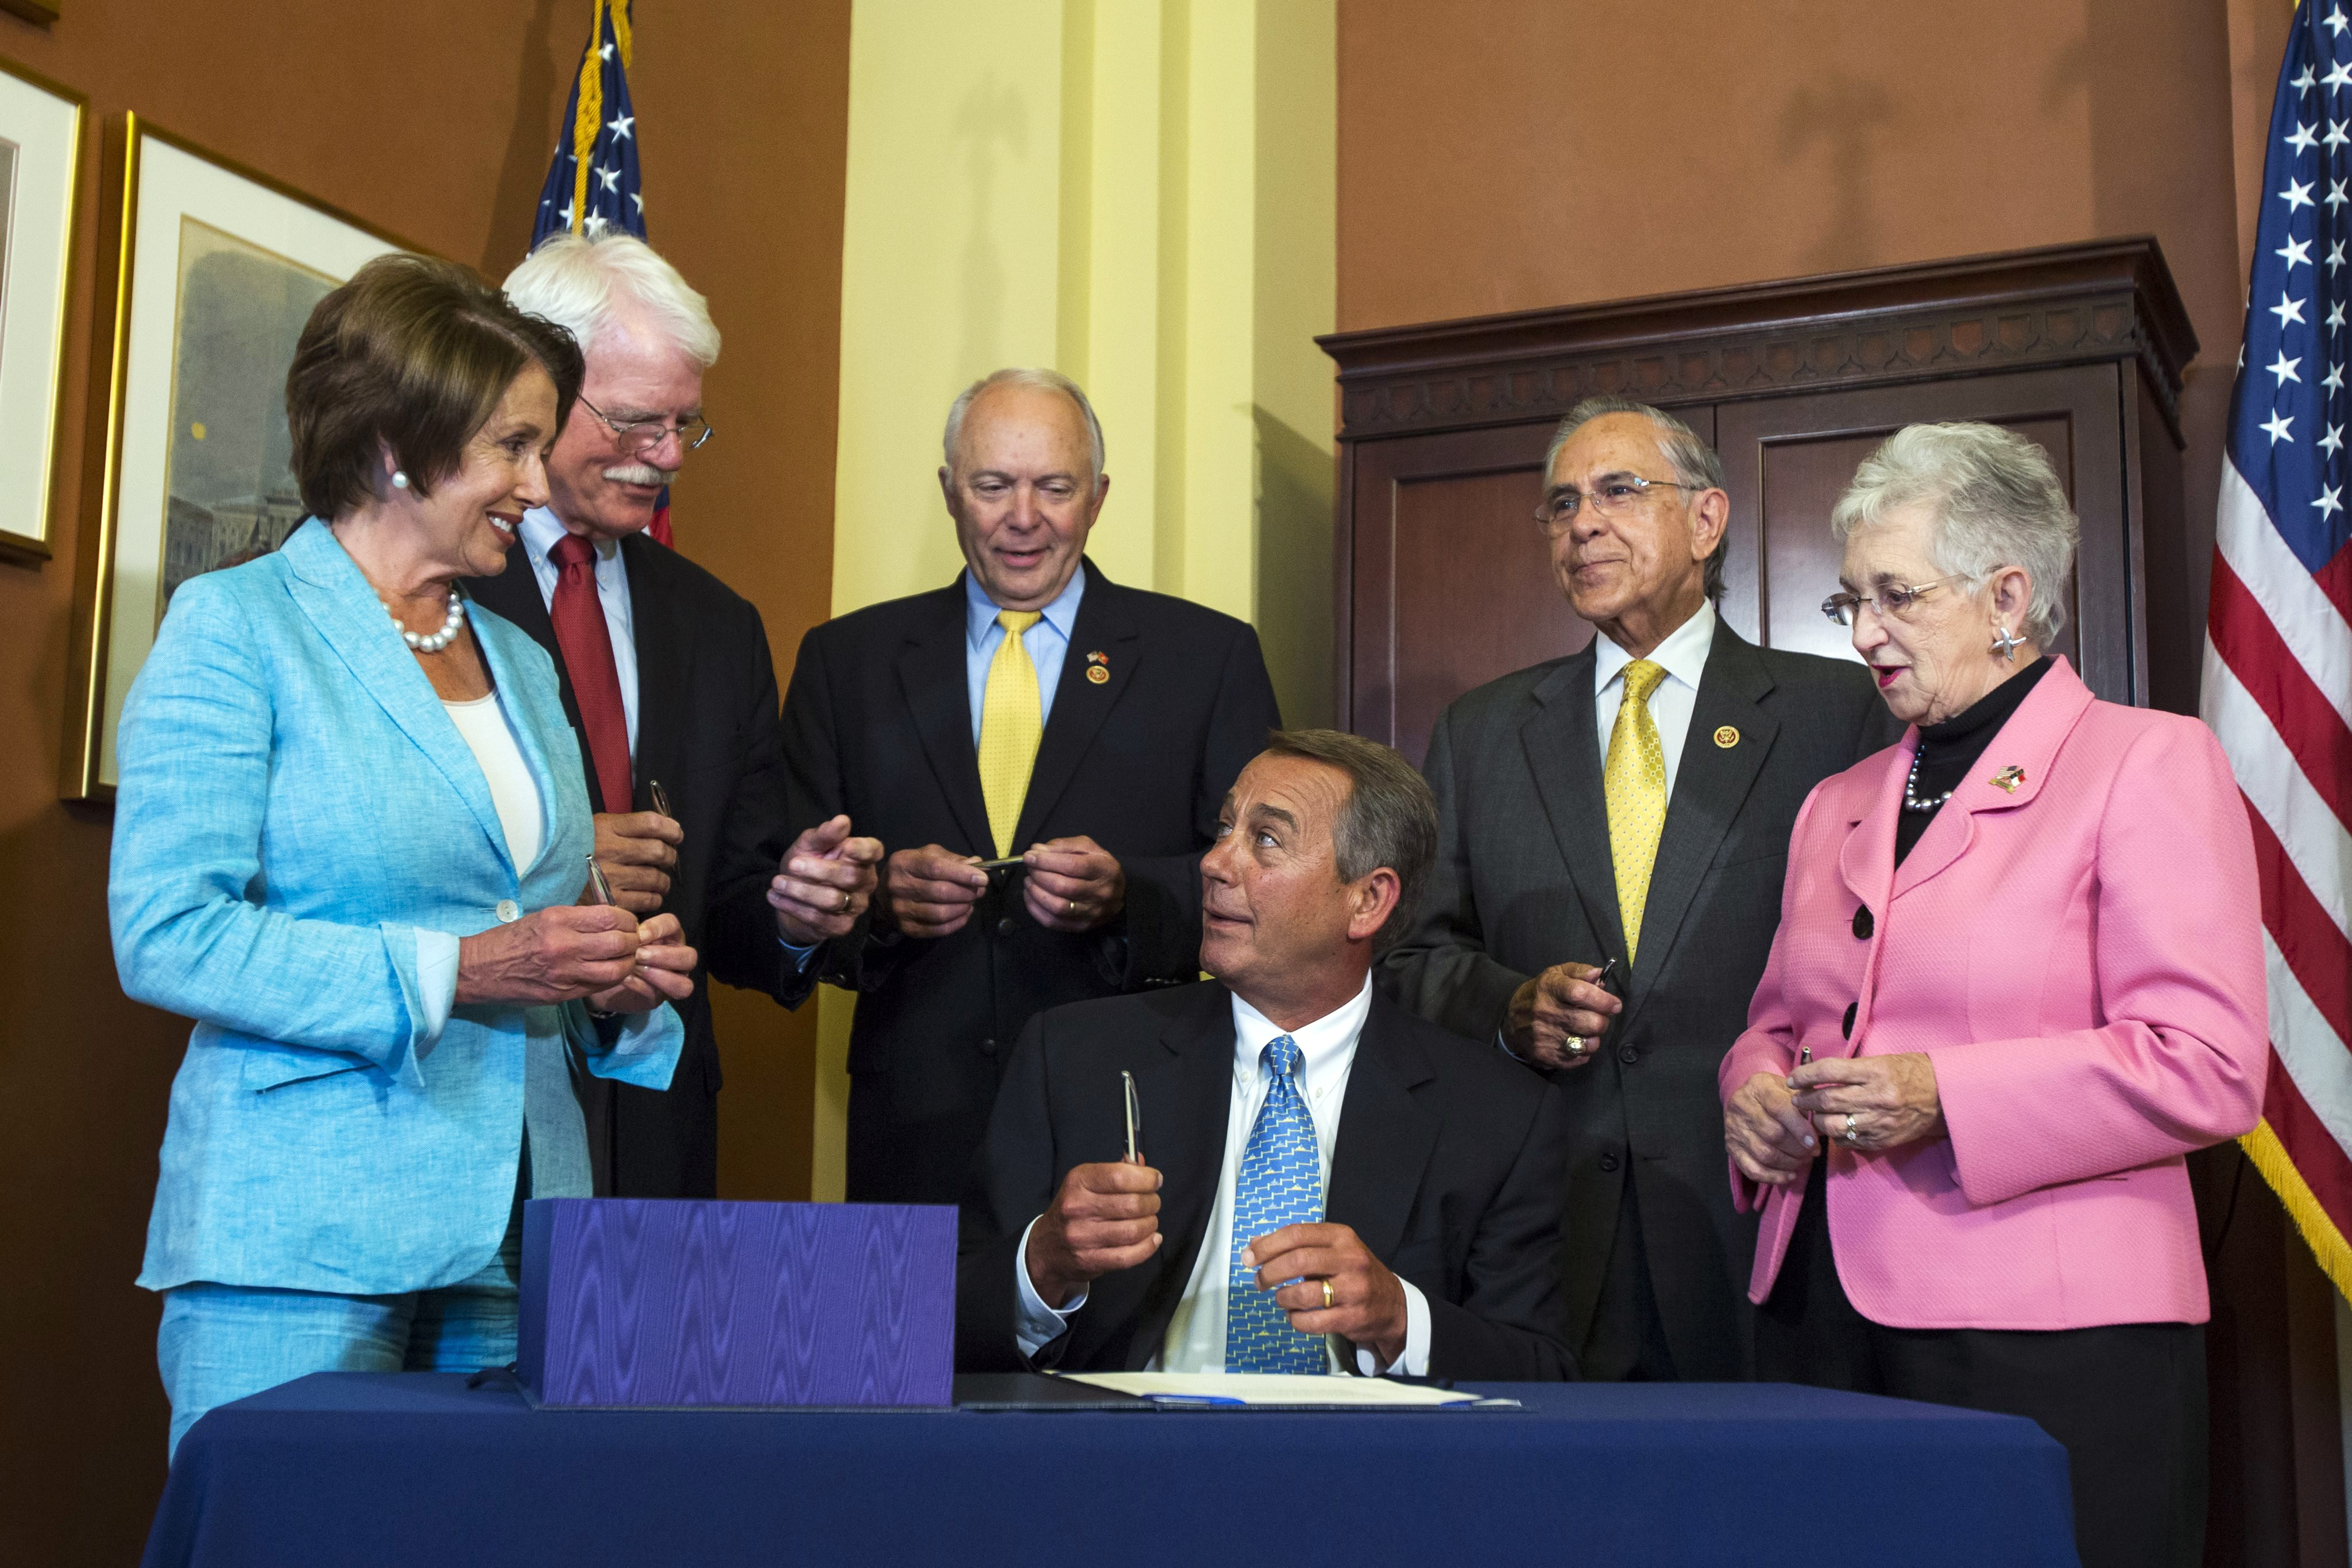 Republican Speaker of the House John Boehner (C) reacts after signing the Workforce Innovation and Opportunity Act with (from left to right) Democratic House Minority Leader Nancy Pelosi, Democratic Congressman George Miller, Republican Congressman John Kline, Republican Congresswoman Virginia Foxx, and Democratic Congressman Ruben Hinojosa in the Speaker's Conference Room in the US Capitol in Washington on July 11, 2014. (Jim Lo Scalzo—EPA)